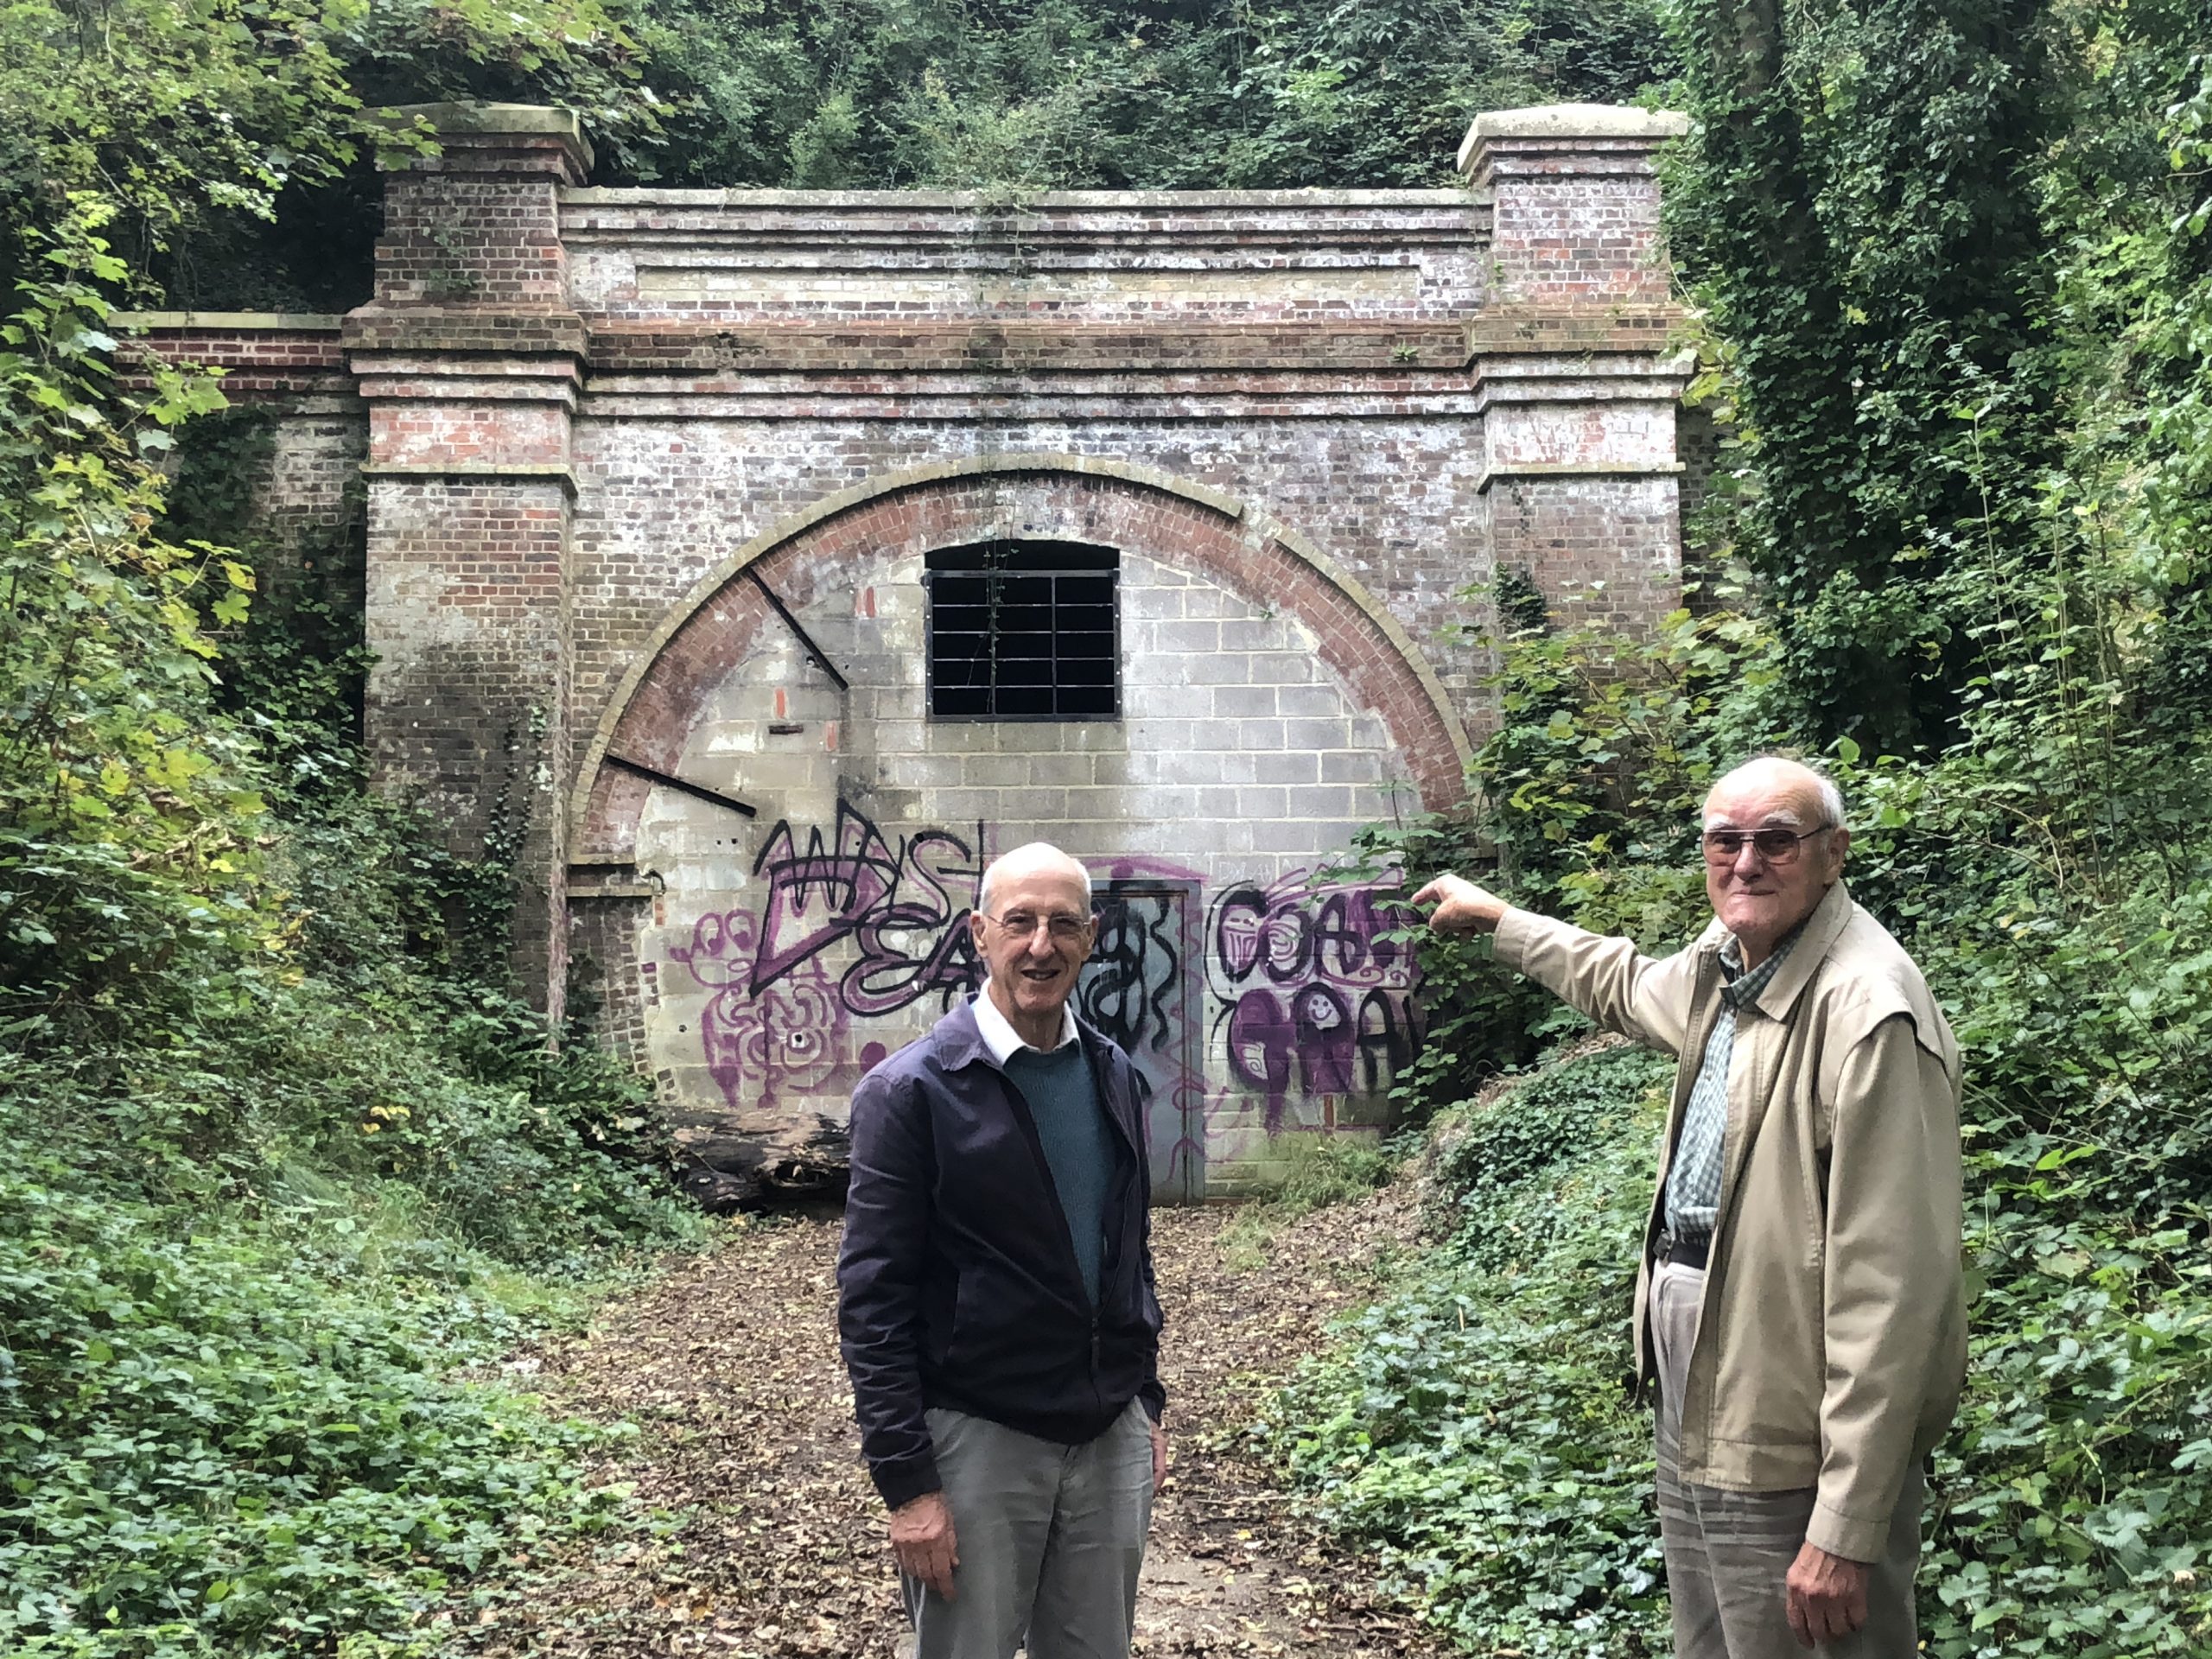 Alan Wallbank (left) and branch elder statesman Joe Whicher (right) enjoying a branch visit to the Centurion Way seen at the entrance to West Dean Tunnel. 05 October 2023